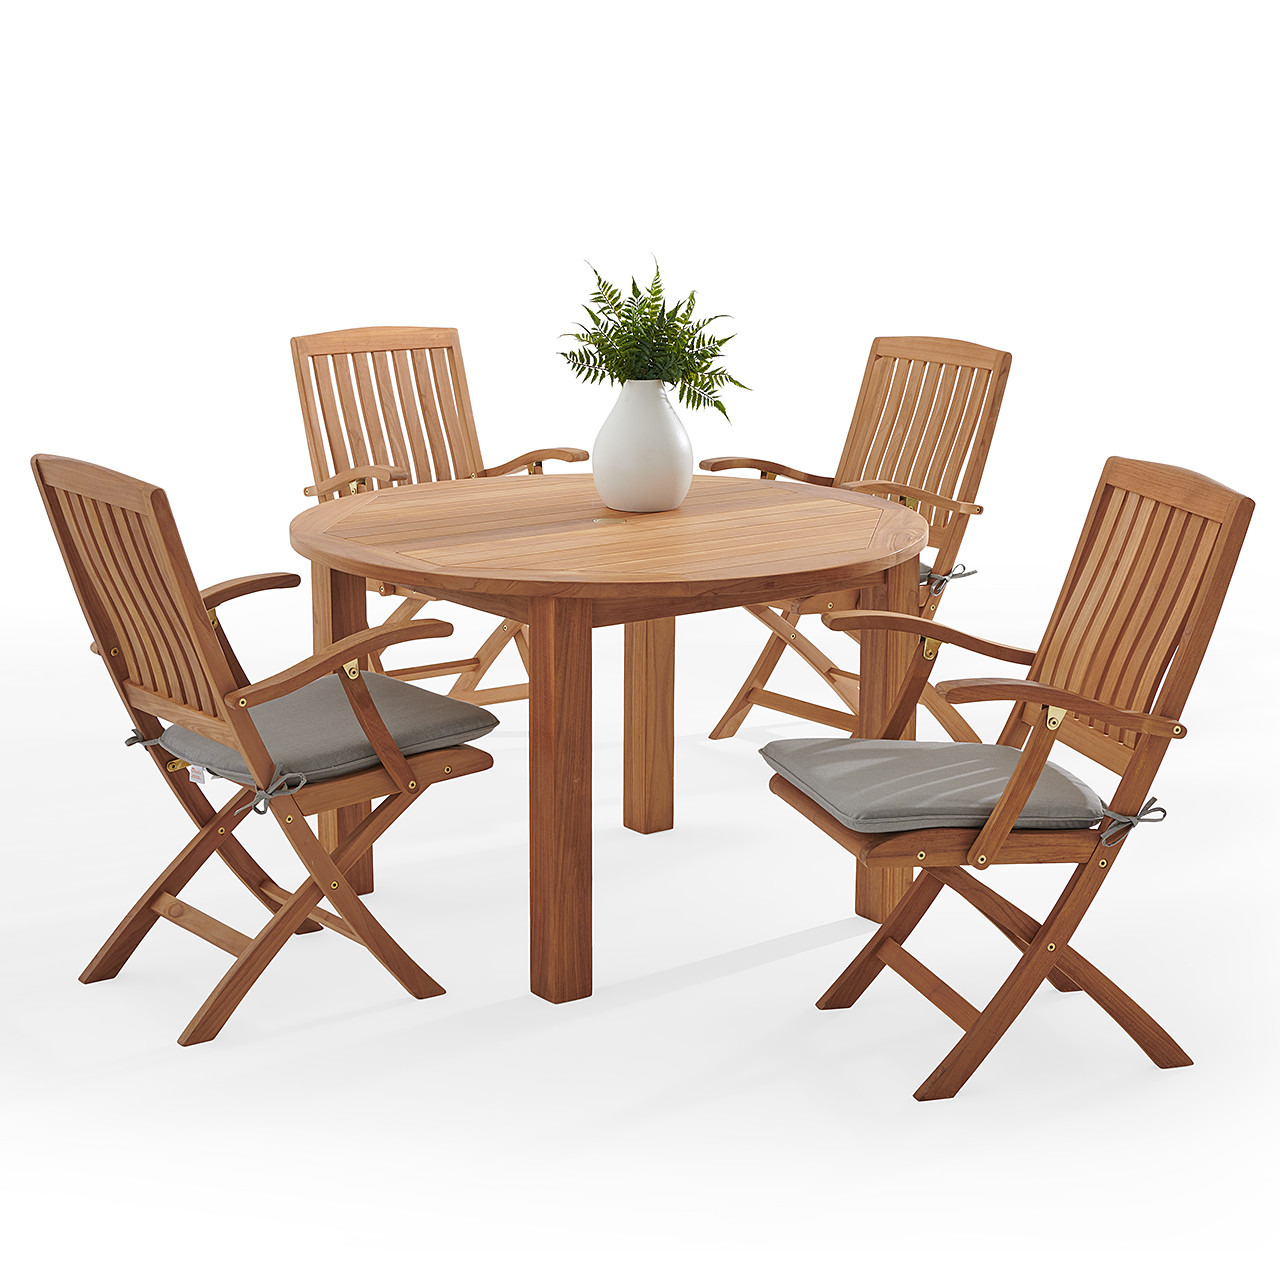 Westport Teak with Cushions 5 Piece Arm Dining Set + Oxford 48 in. D Table